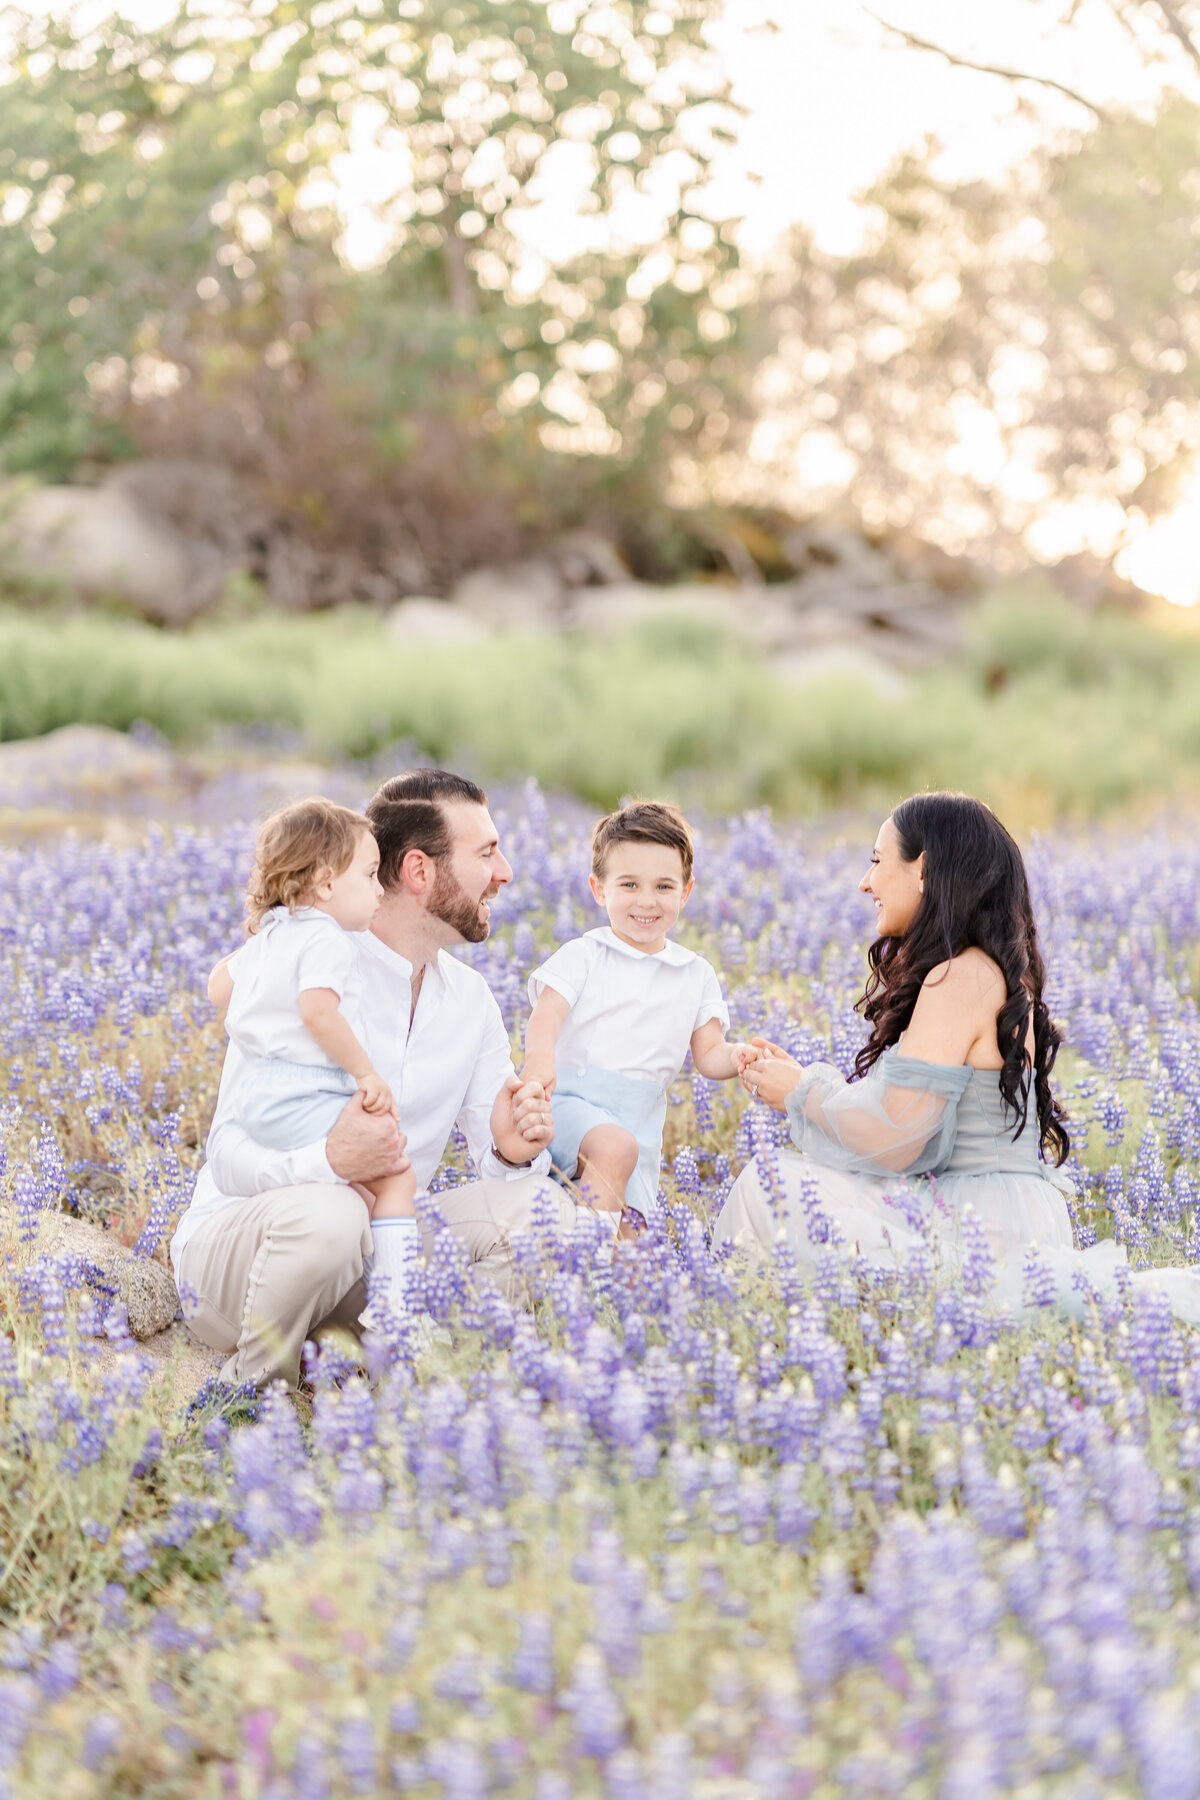 Family dressed in grey and soft blue tones sit in a field of lupine flowers laughing together photographed by Bay area photographer, Light Livin Photography.